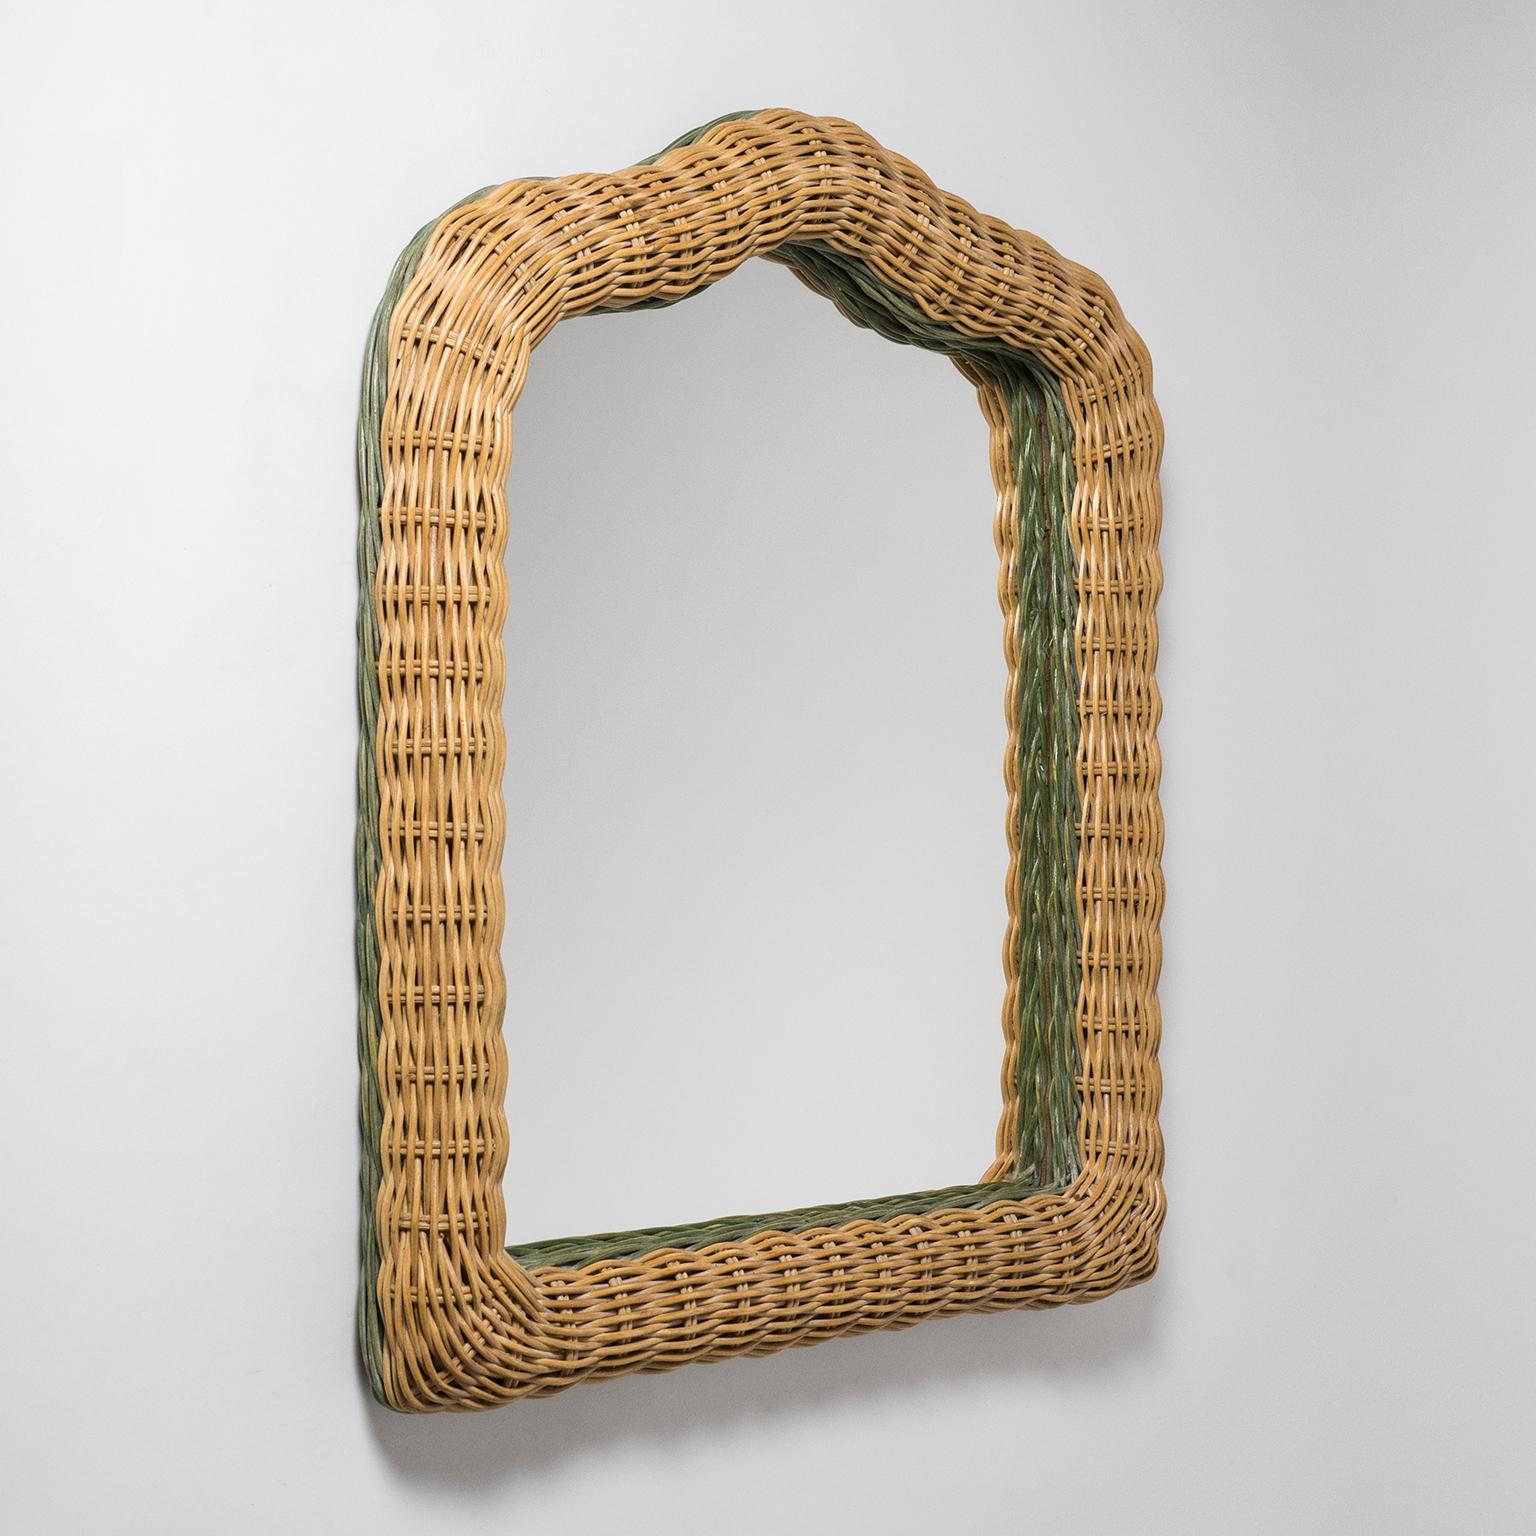 Unusually shaped French artisanal rattan mirror from the 1960s-early 1970s. Broad dual color rattan frame in very good original condition.